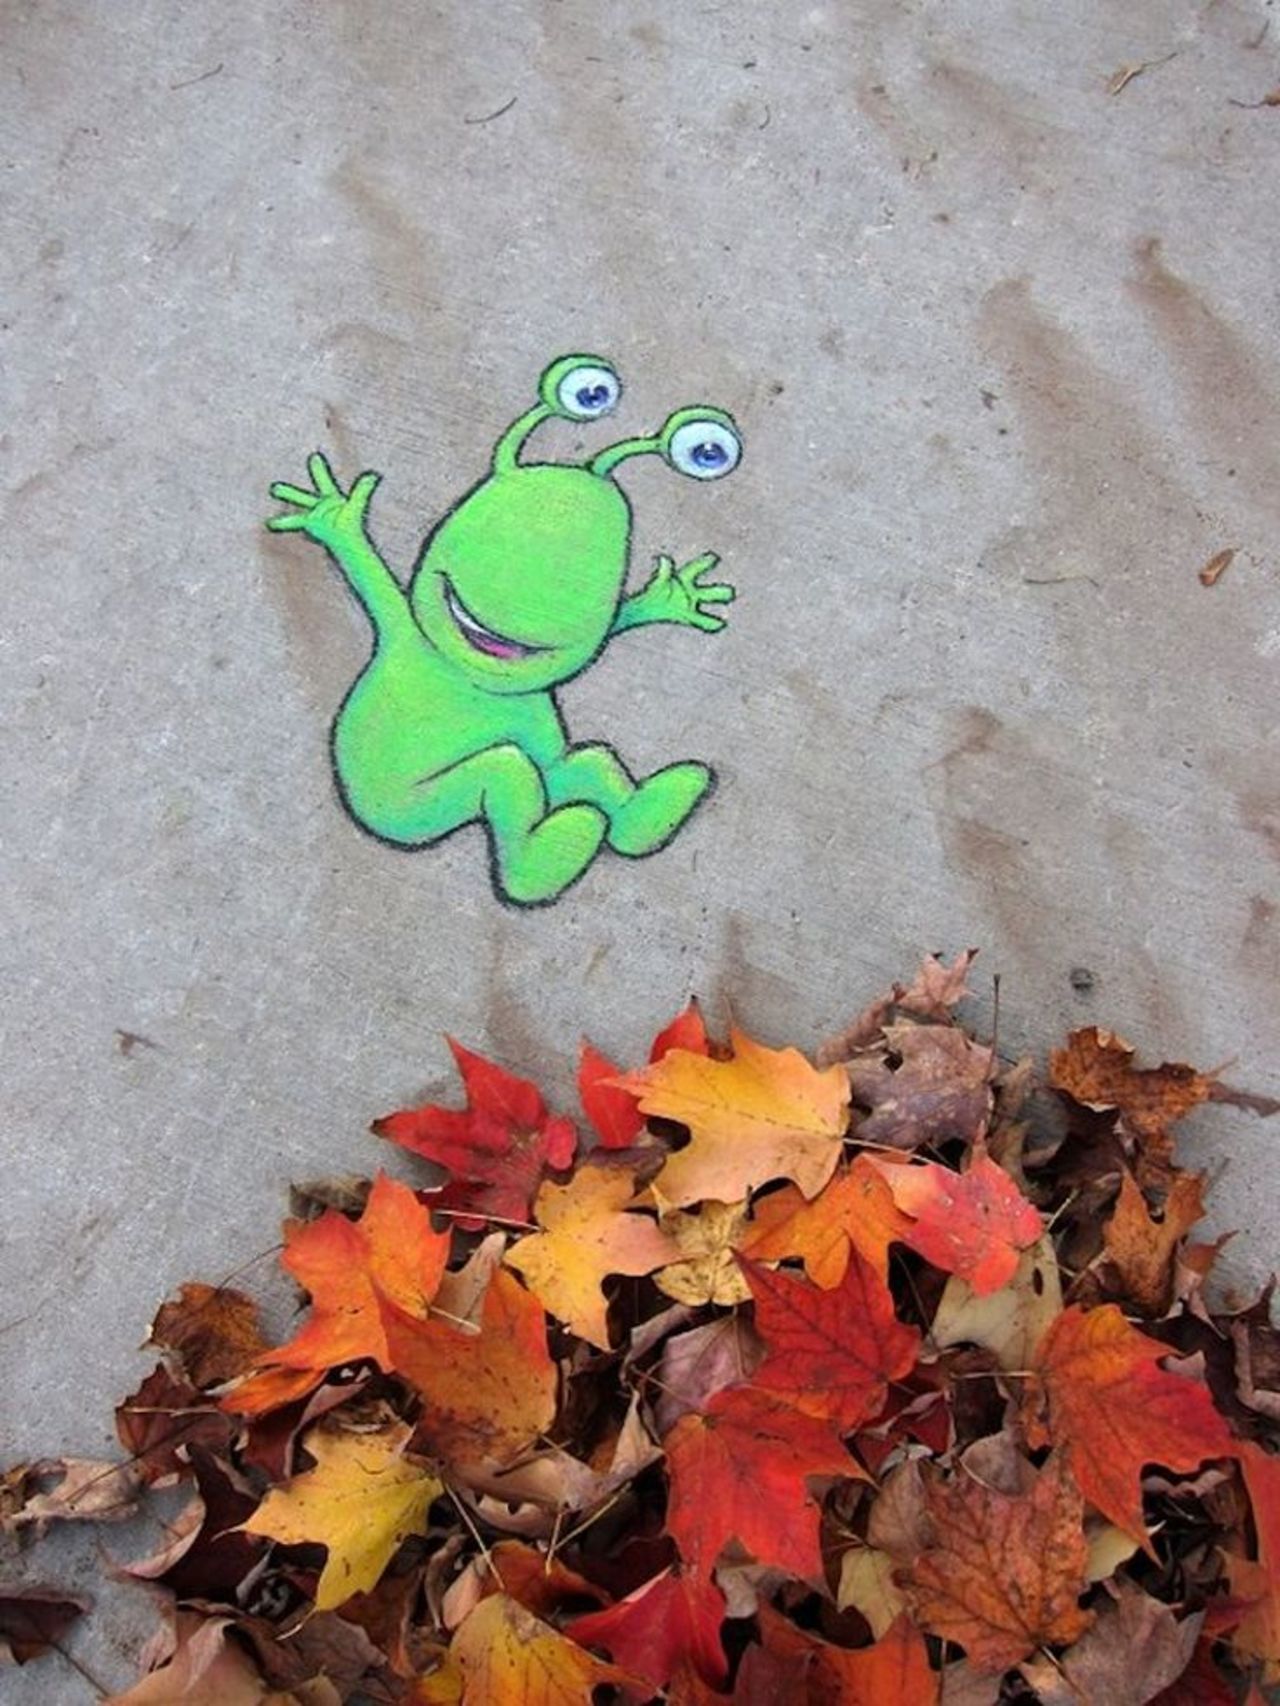 #DavidZinn #Streetart #FallColors Actual real fallen leaves are included in his pieces, around this time of year. https://t.co/GYEudFWd6R